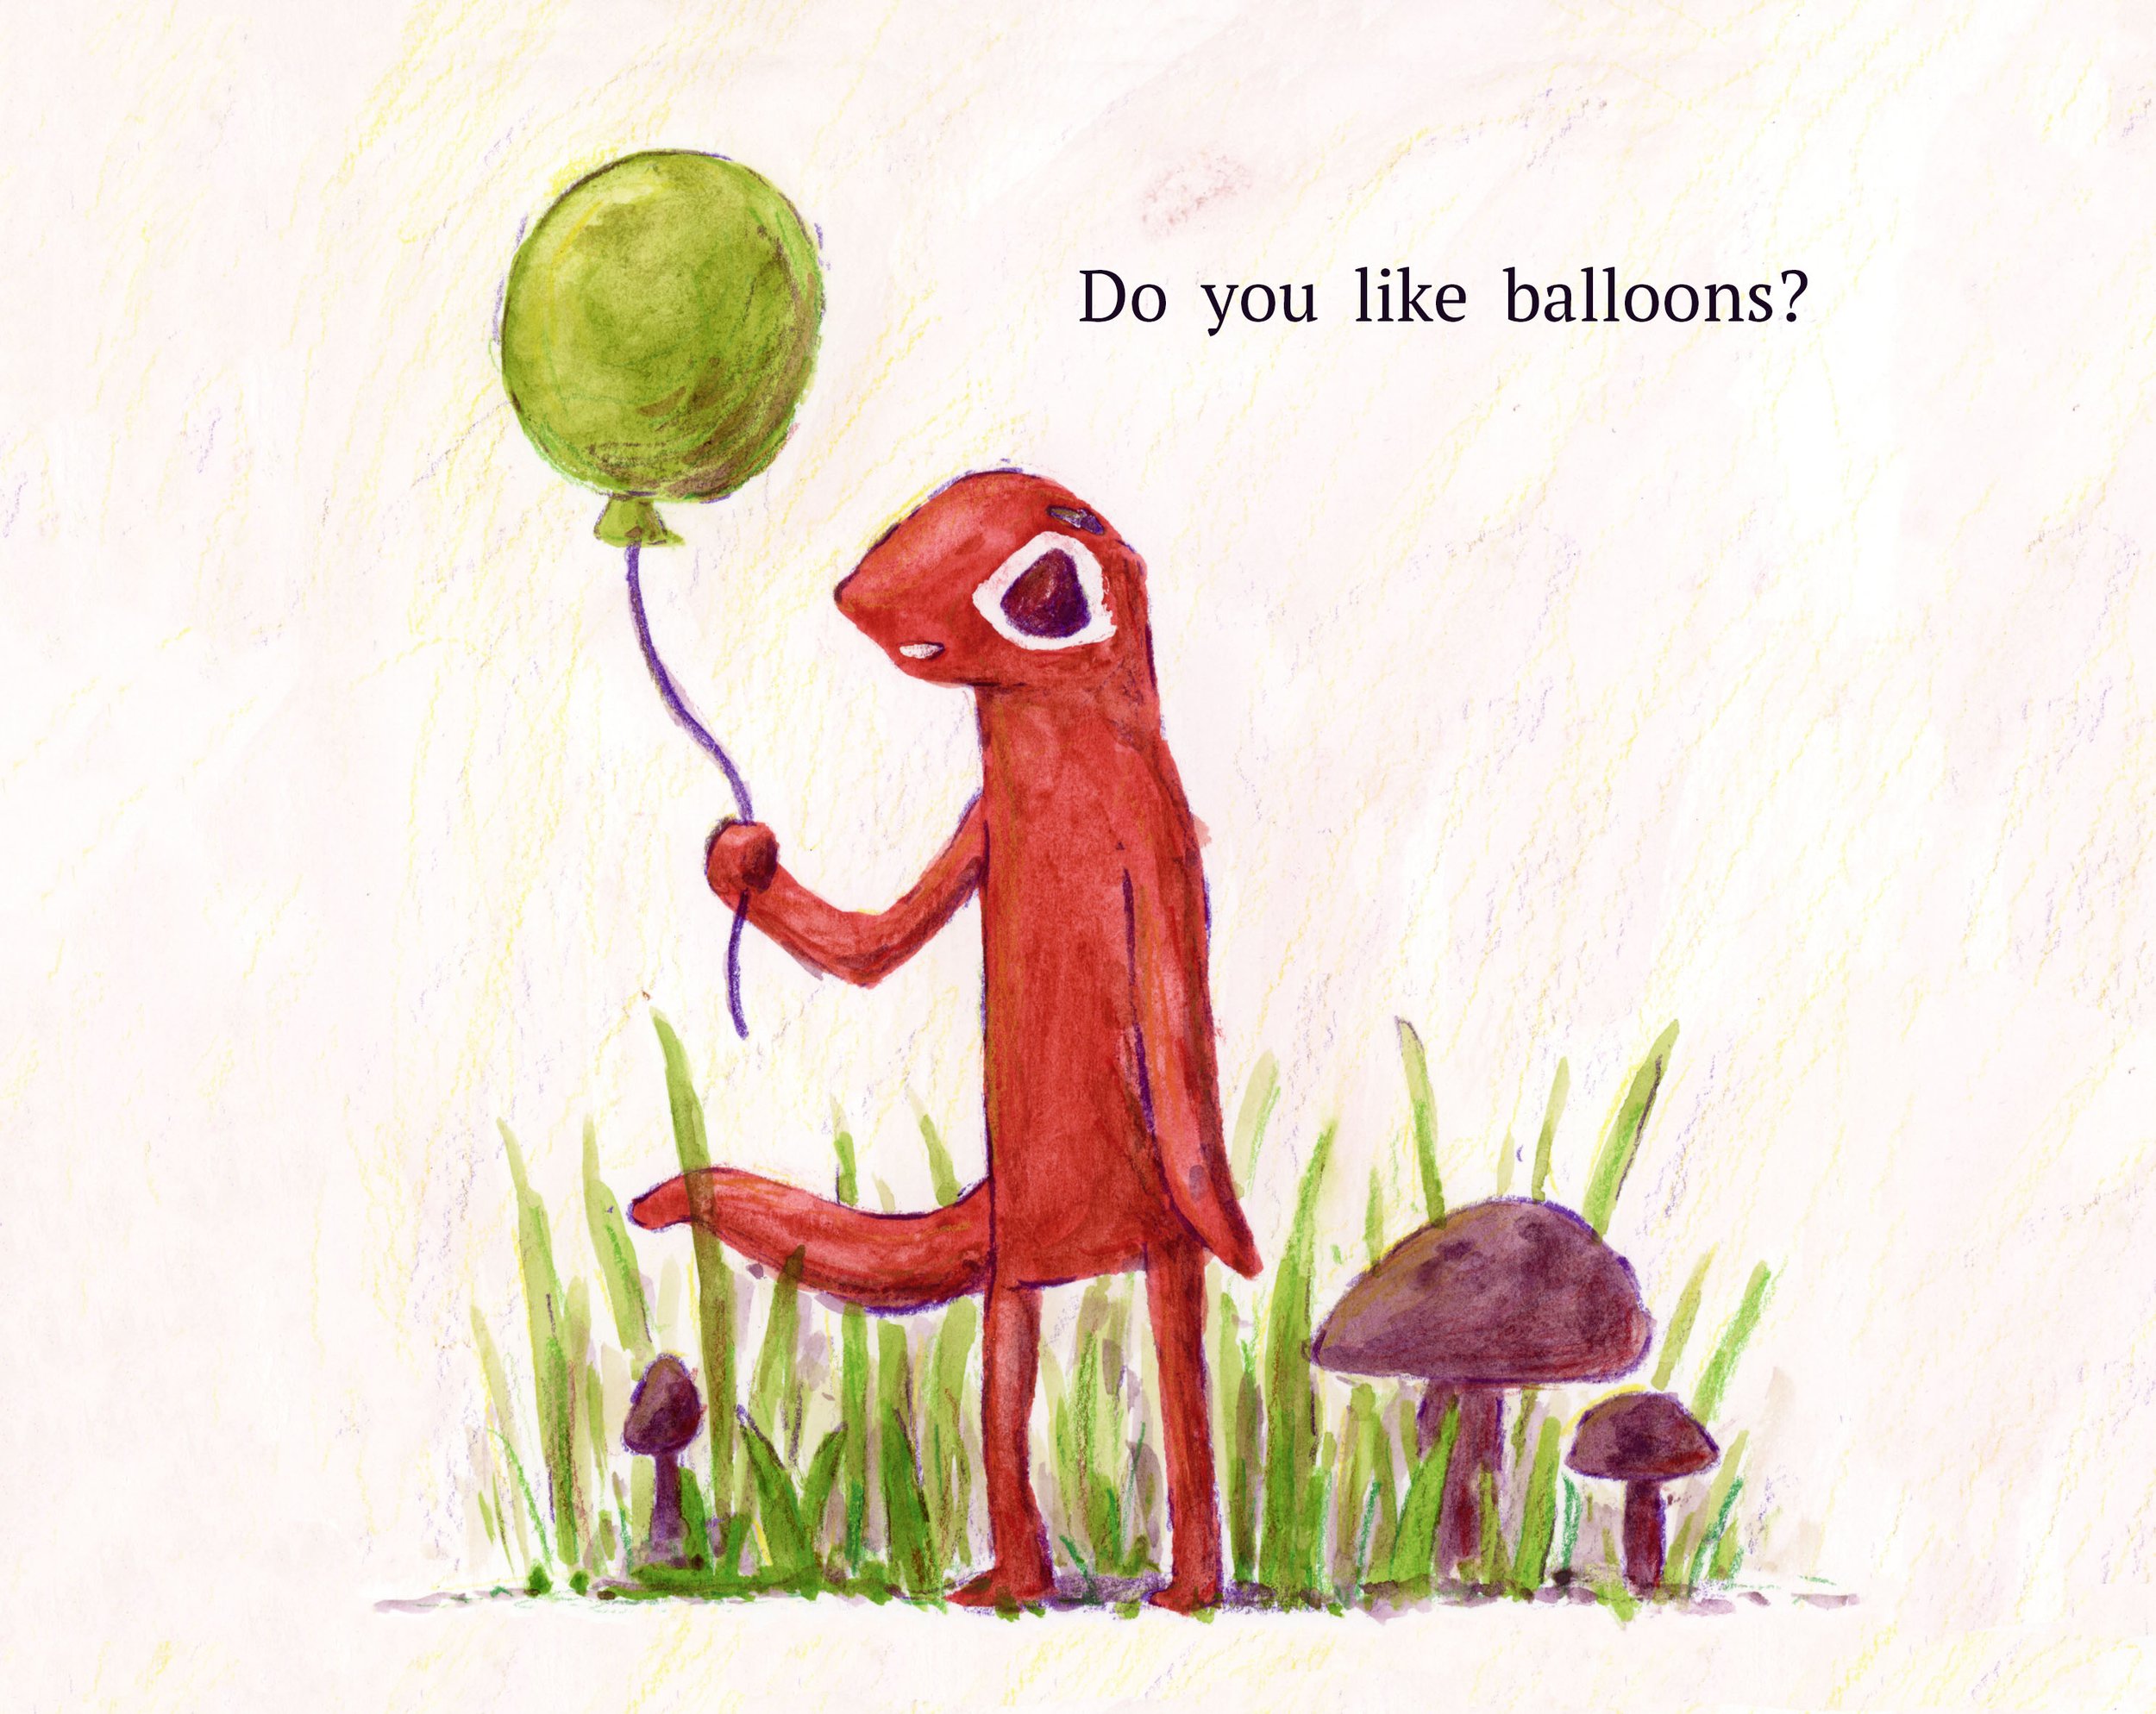 A page from a personal project called "A Day with Balloons".